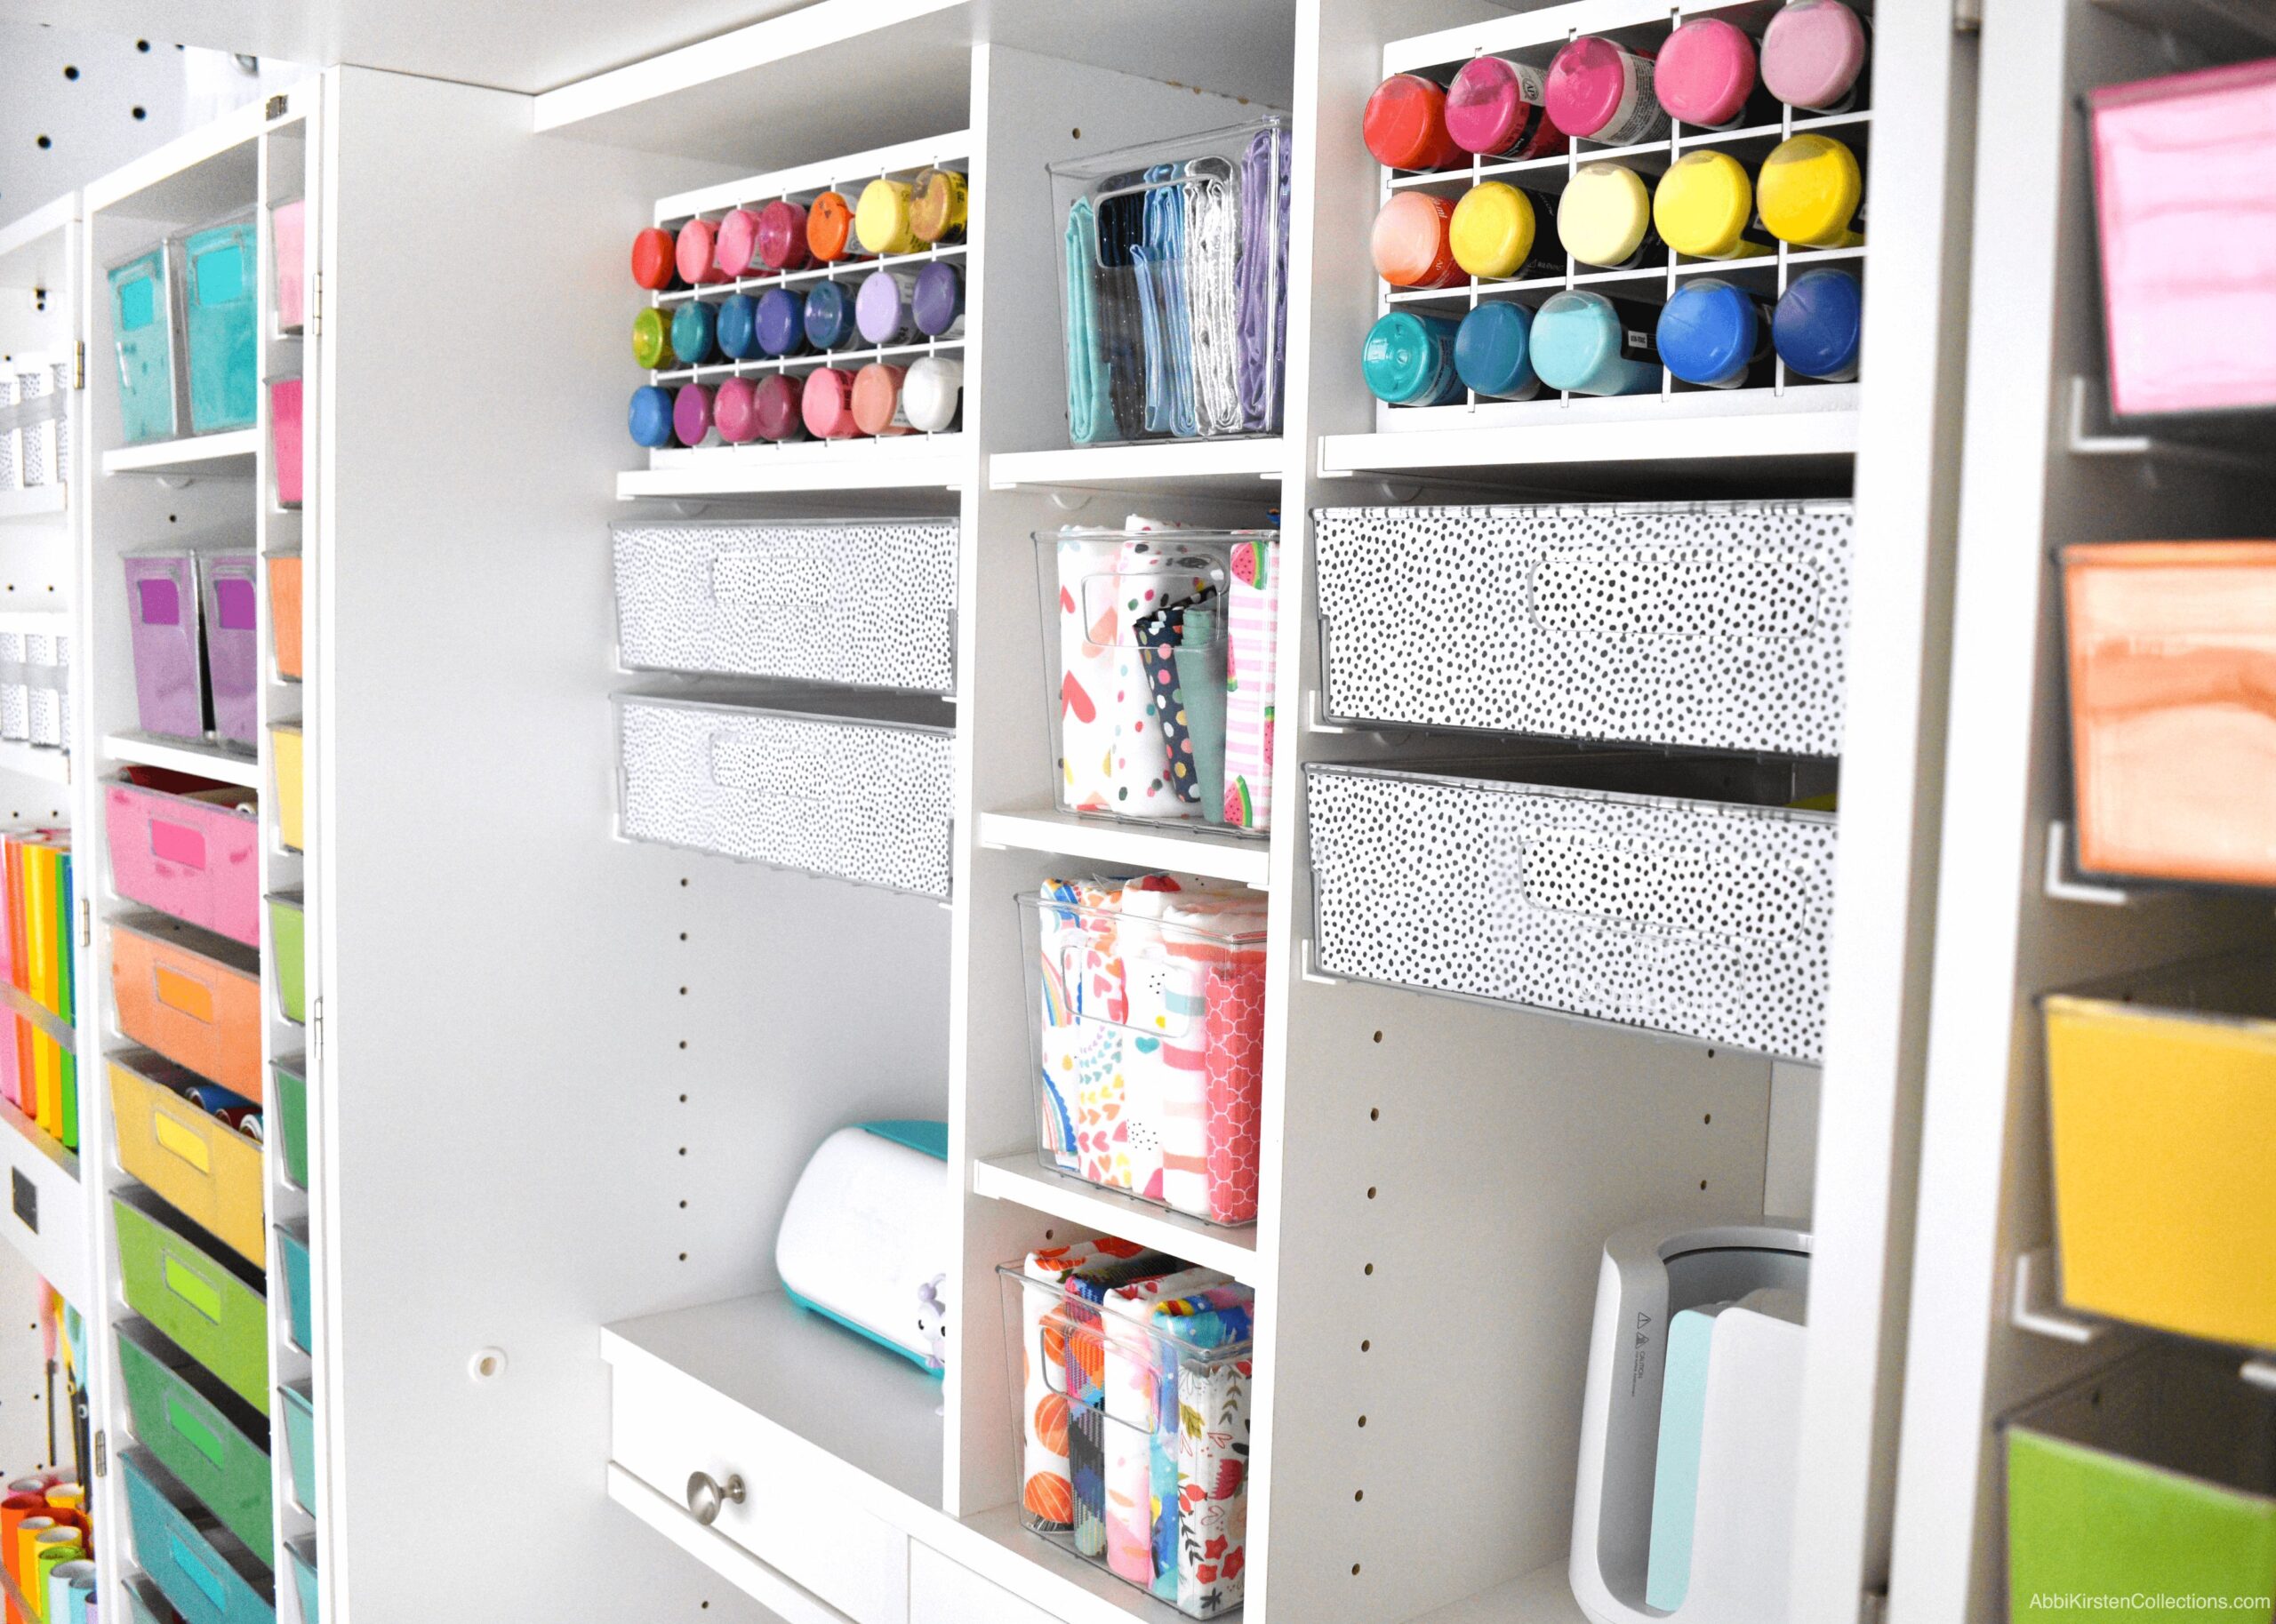 Dreambox Review: How I Organized My Supplies